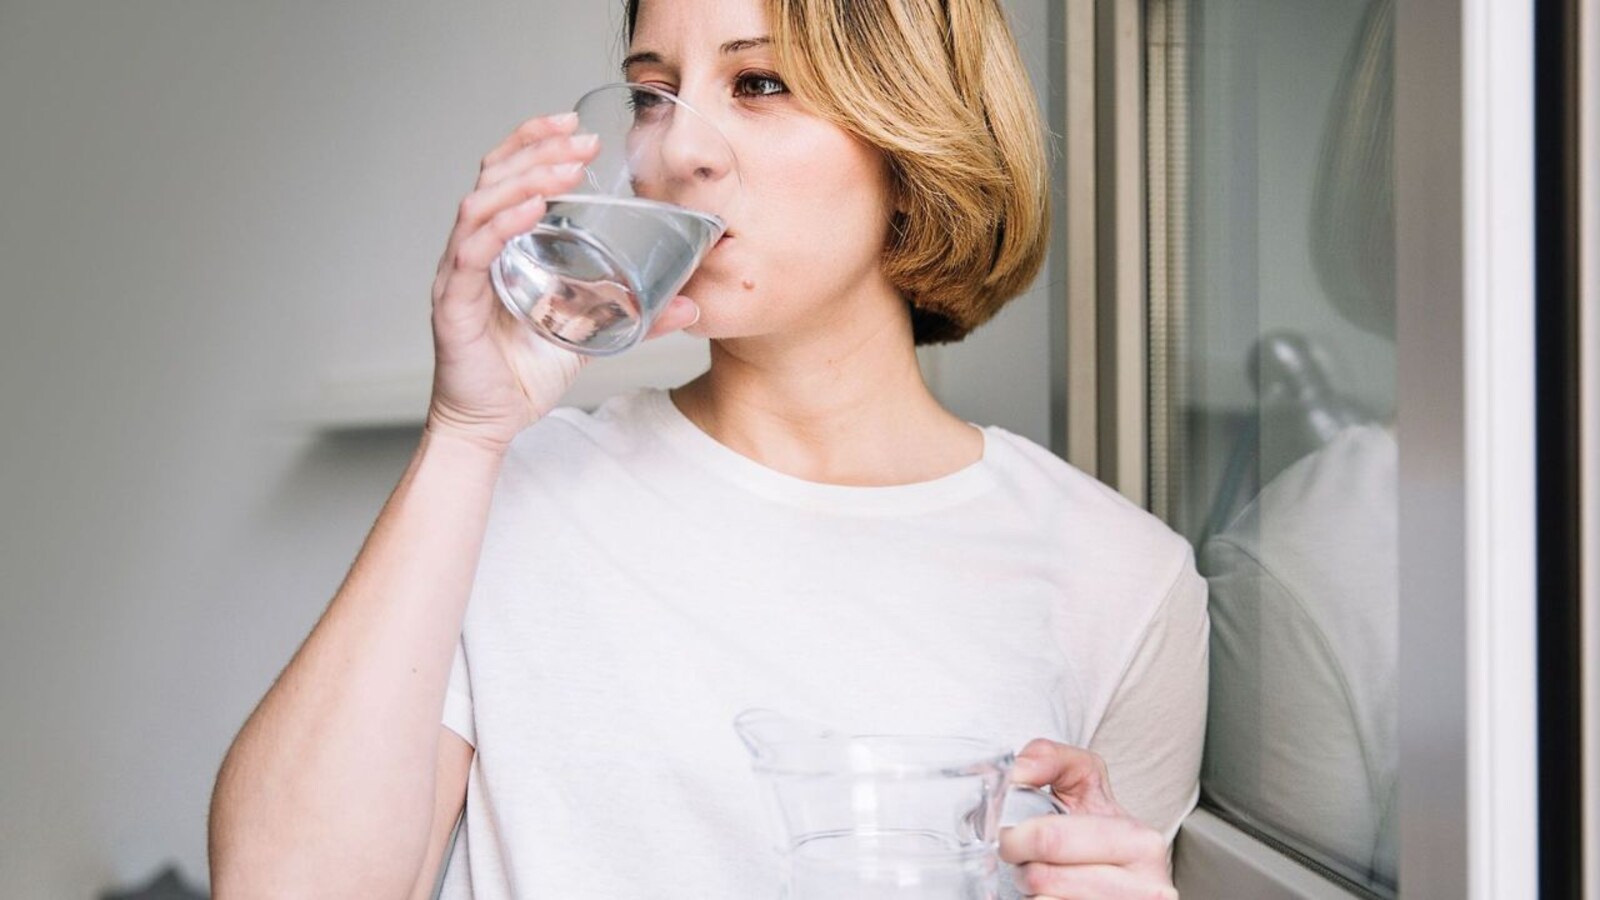 https://images.moneycontrol.com/static-mcnews/2023/04/Drink-lot-of-water-to-avoid-dehydration.jpg?impolicy=website&width=1600&height=900